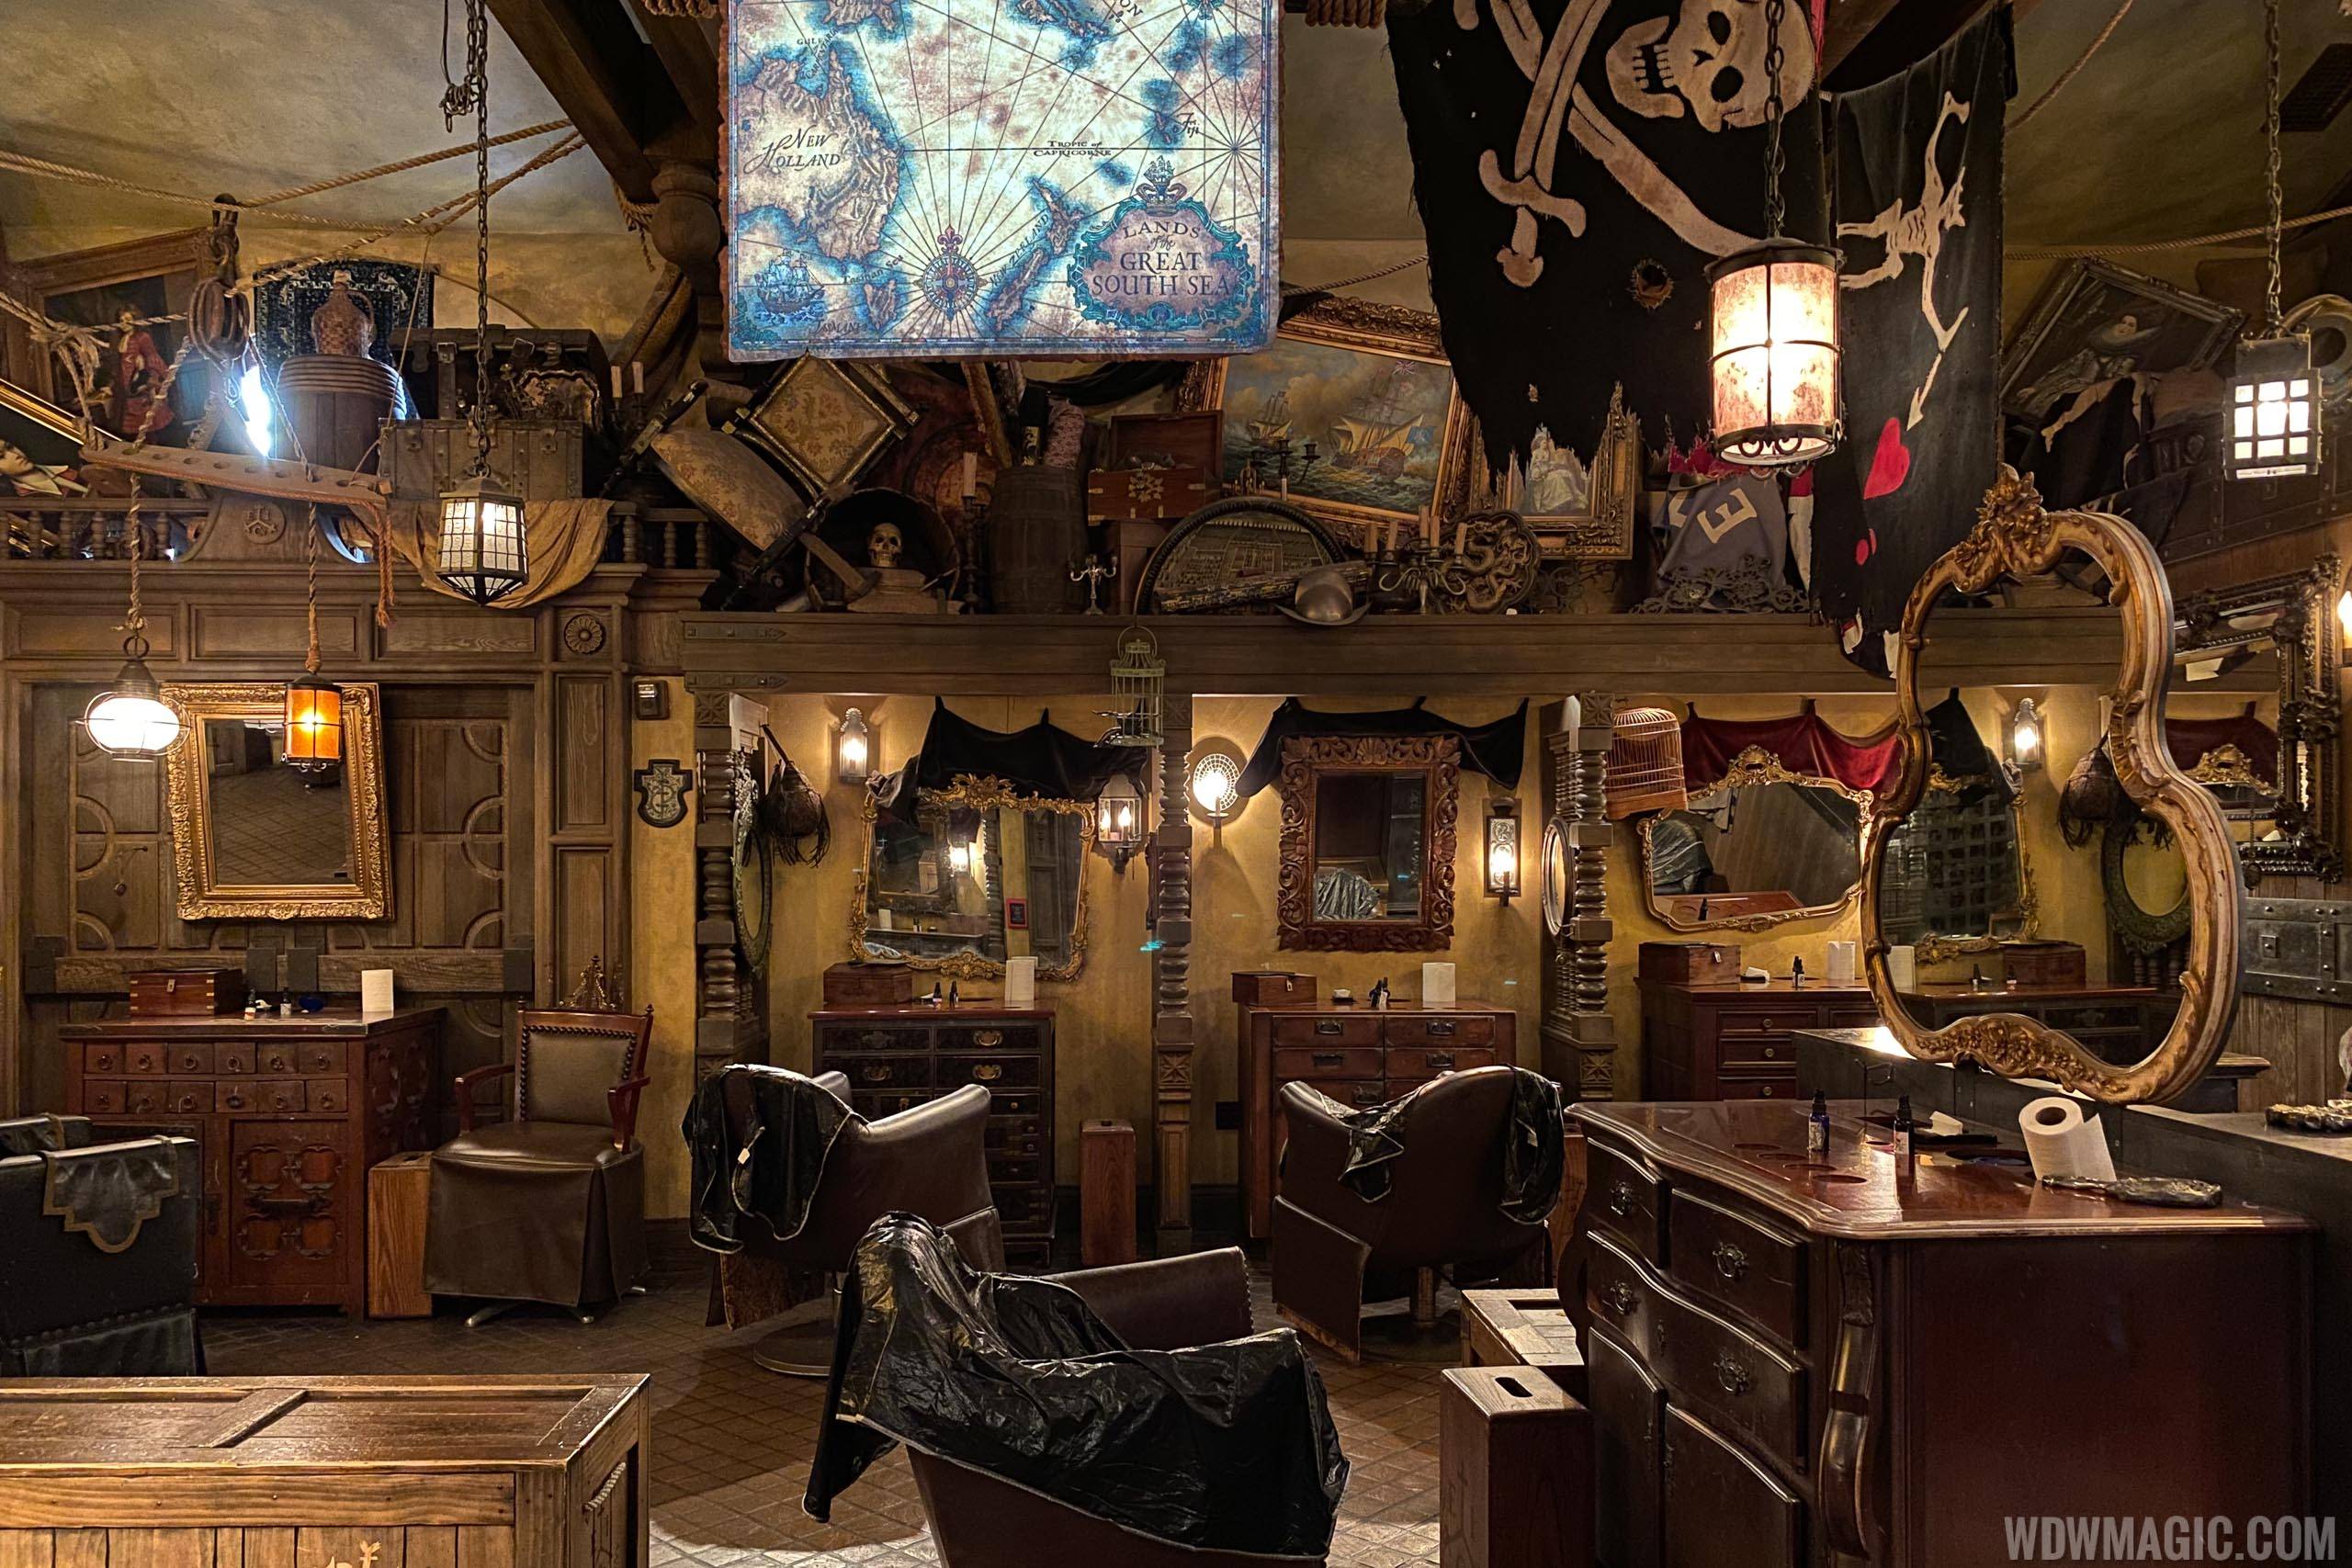 The Pirates League space is no longer used